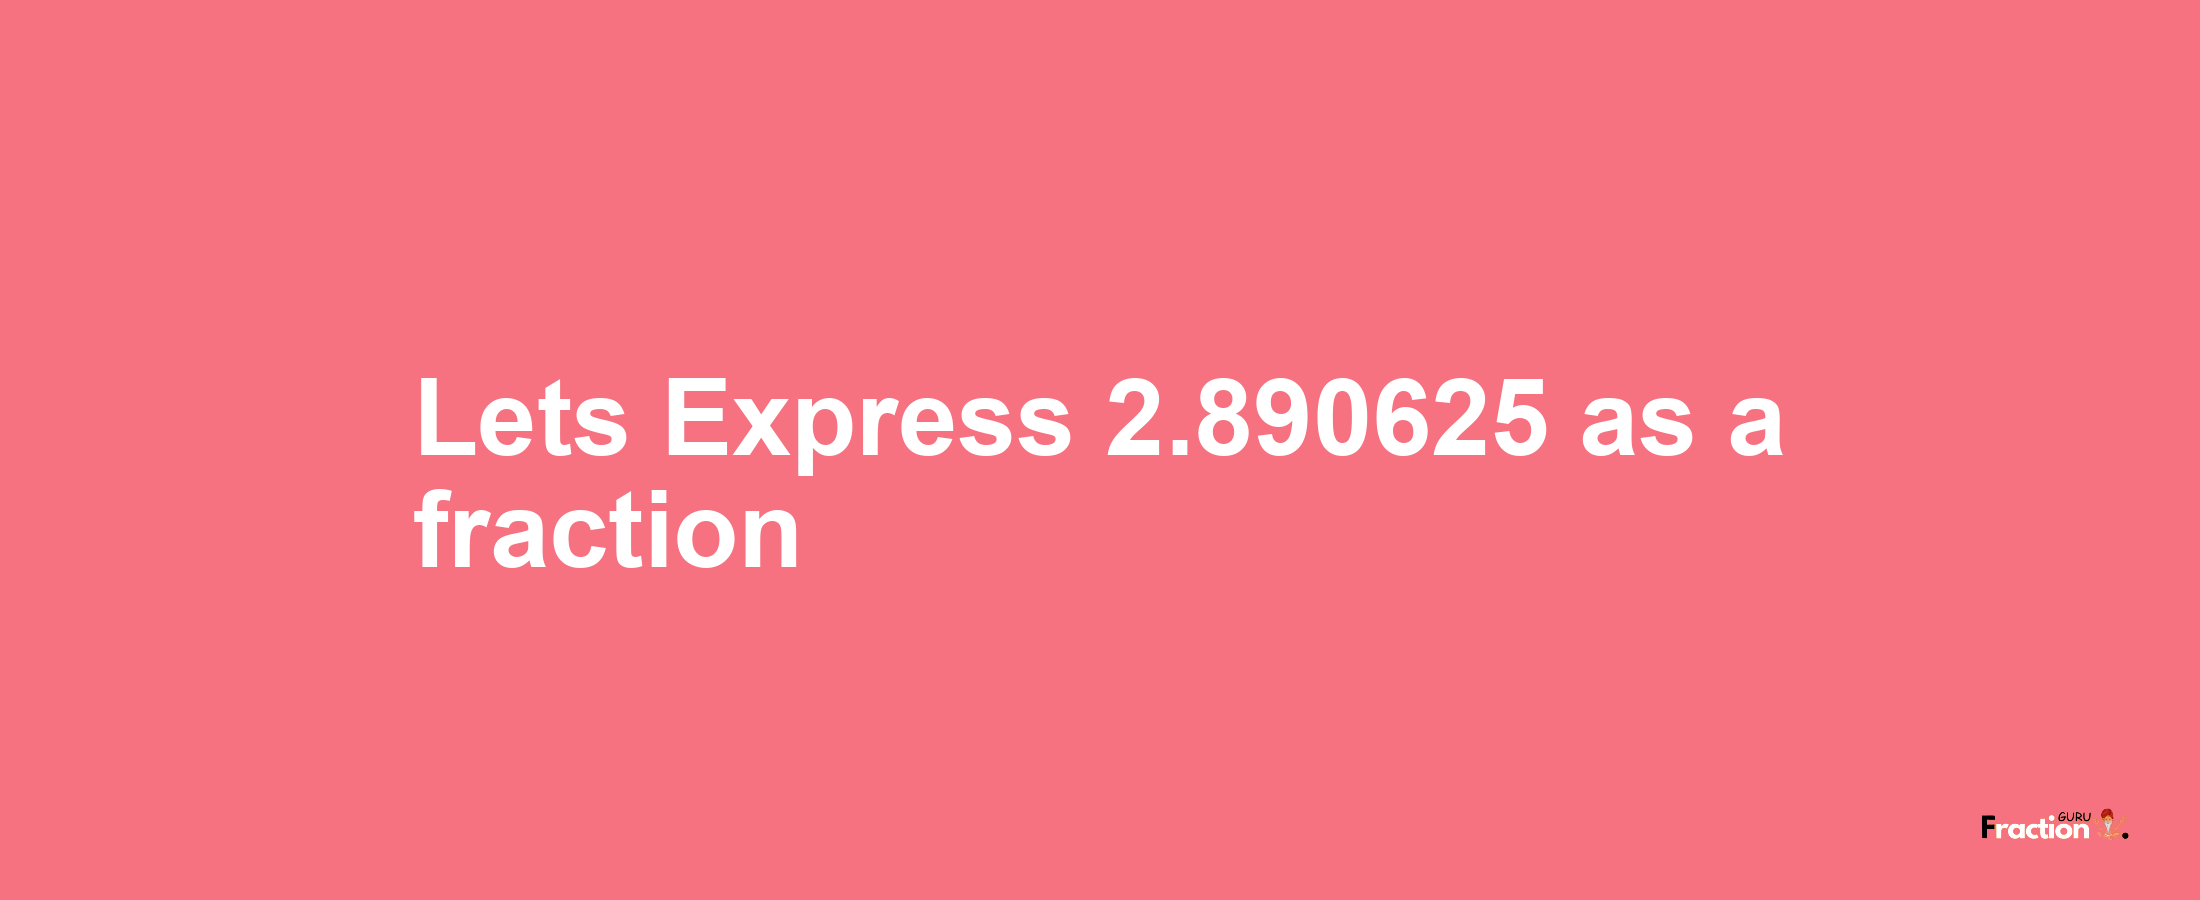 Lets Express 2.890625 as afraction